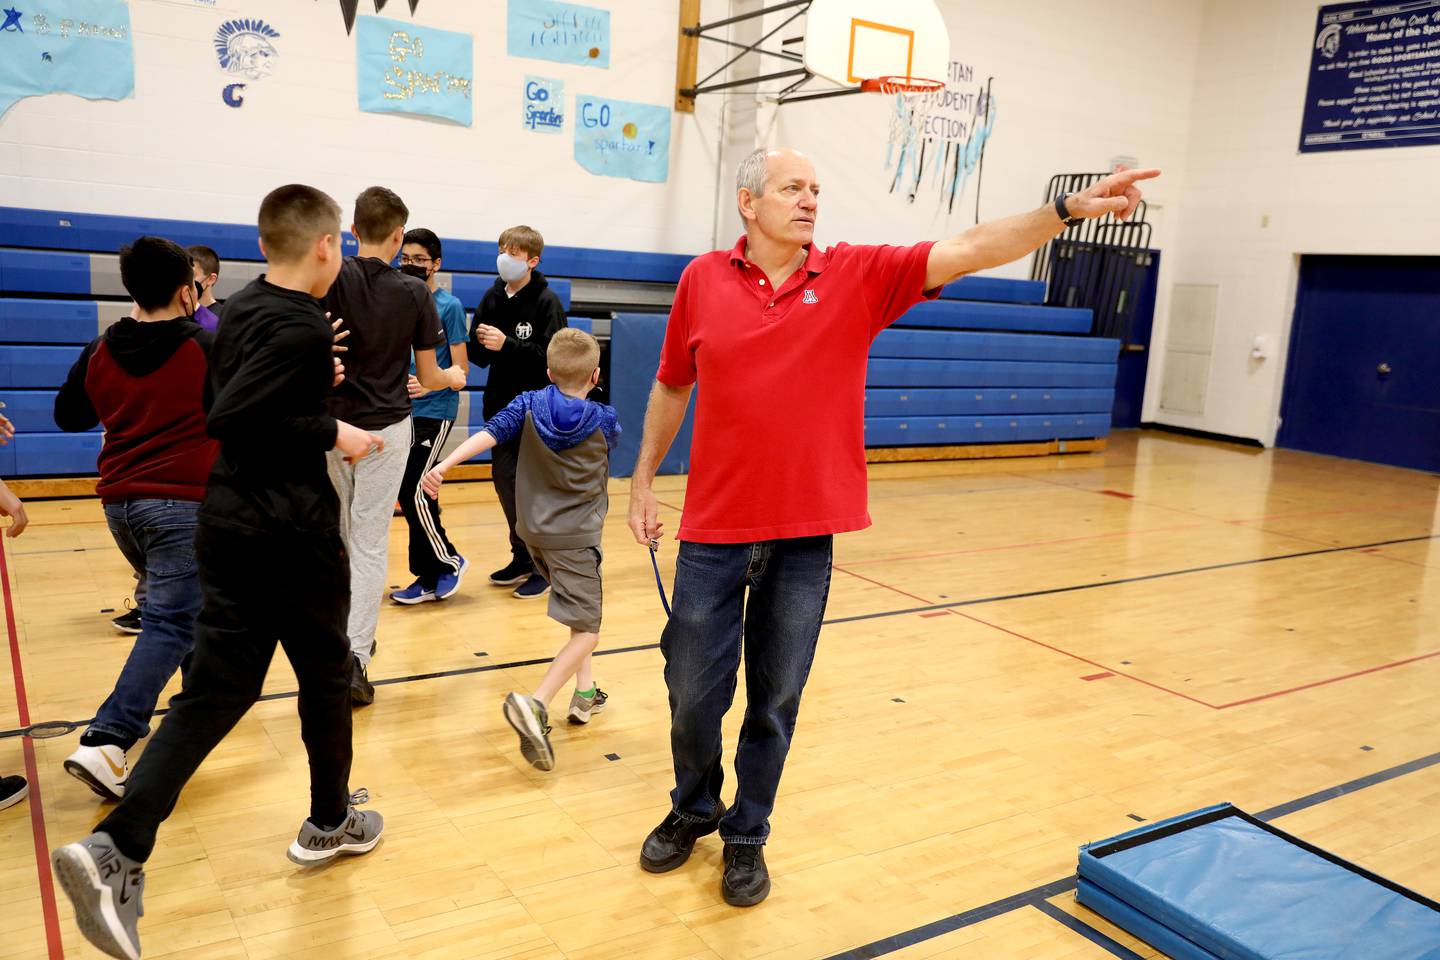 Physical education teacher Corey Toppel teaches a lesson on the shot put to sixth graders at Glen Crest MIddle School in Glen Ellyn. Toppel has been a teacher at the school for 32 years.